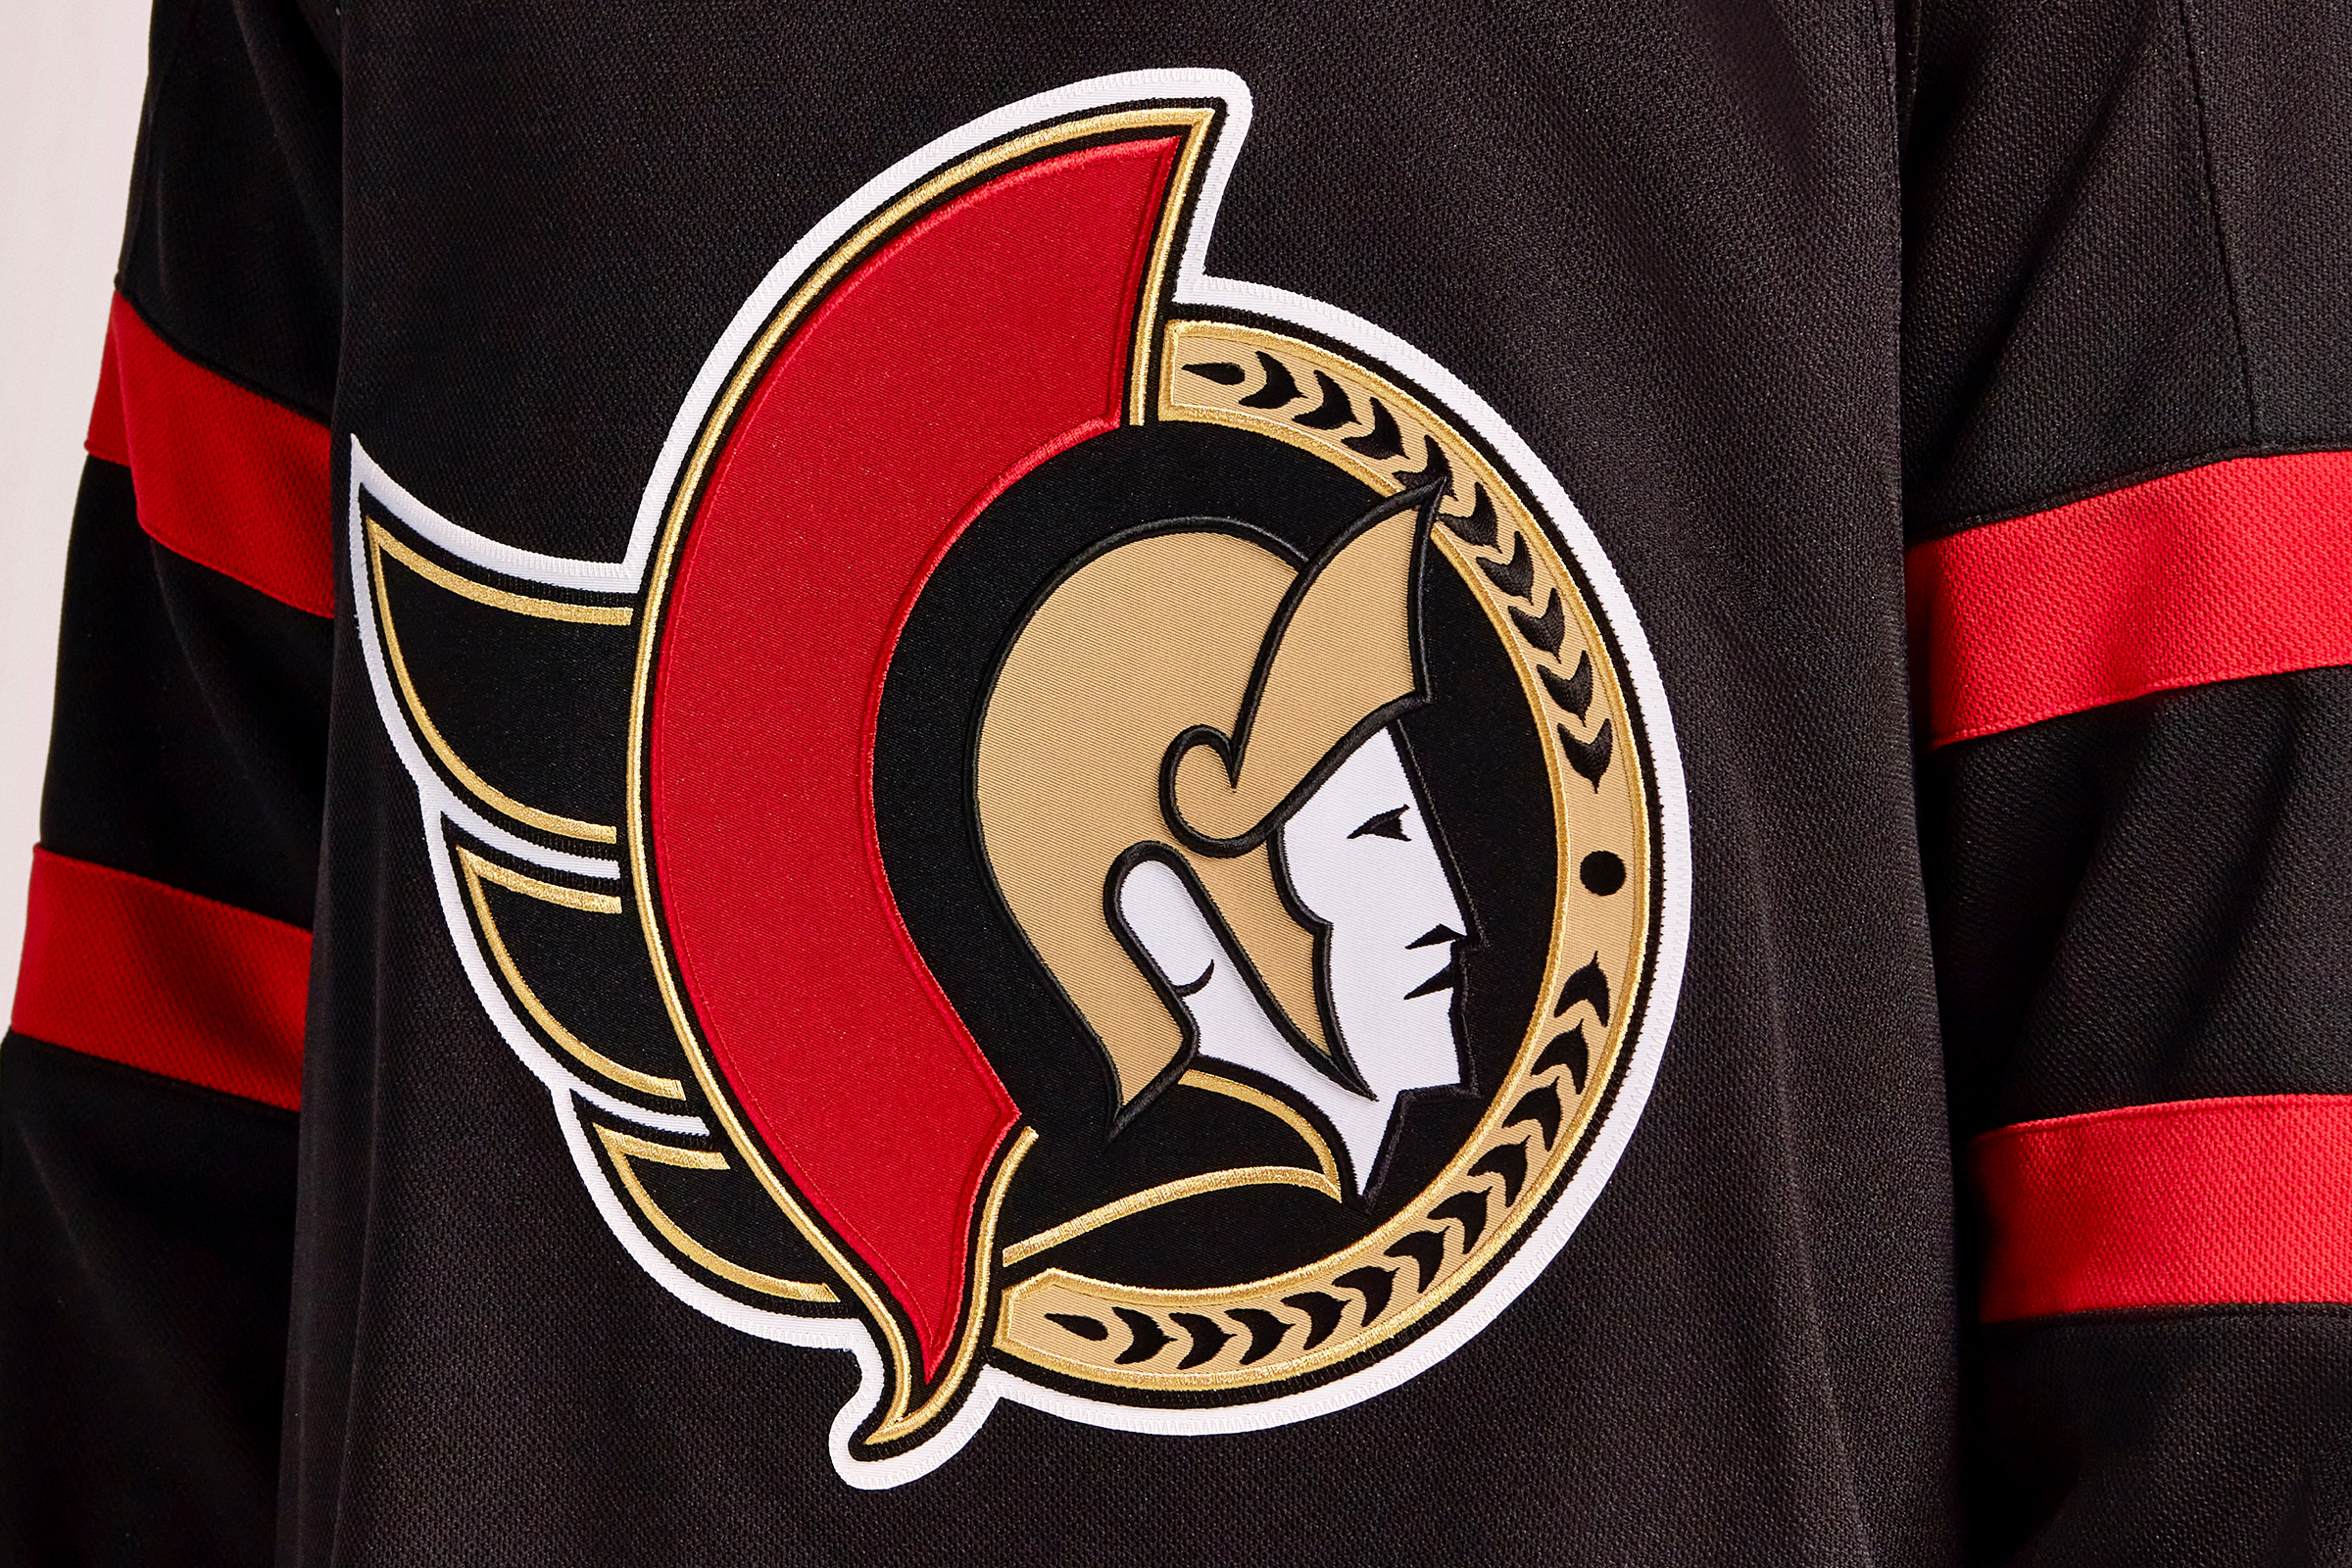 NHL - Uni Watch breaks down the new uniform and logo the Florida